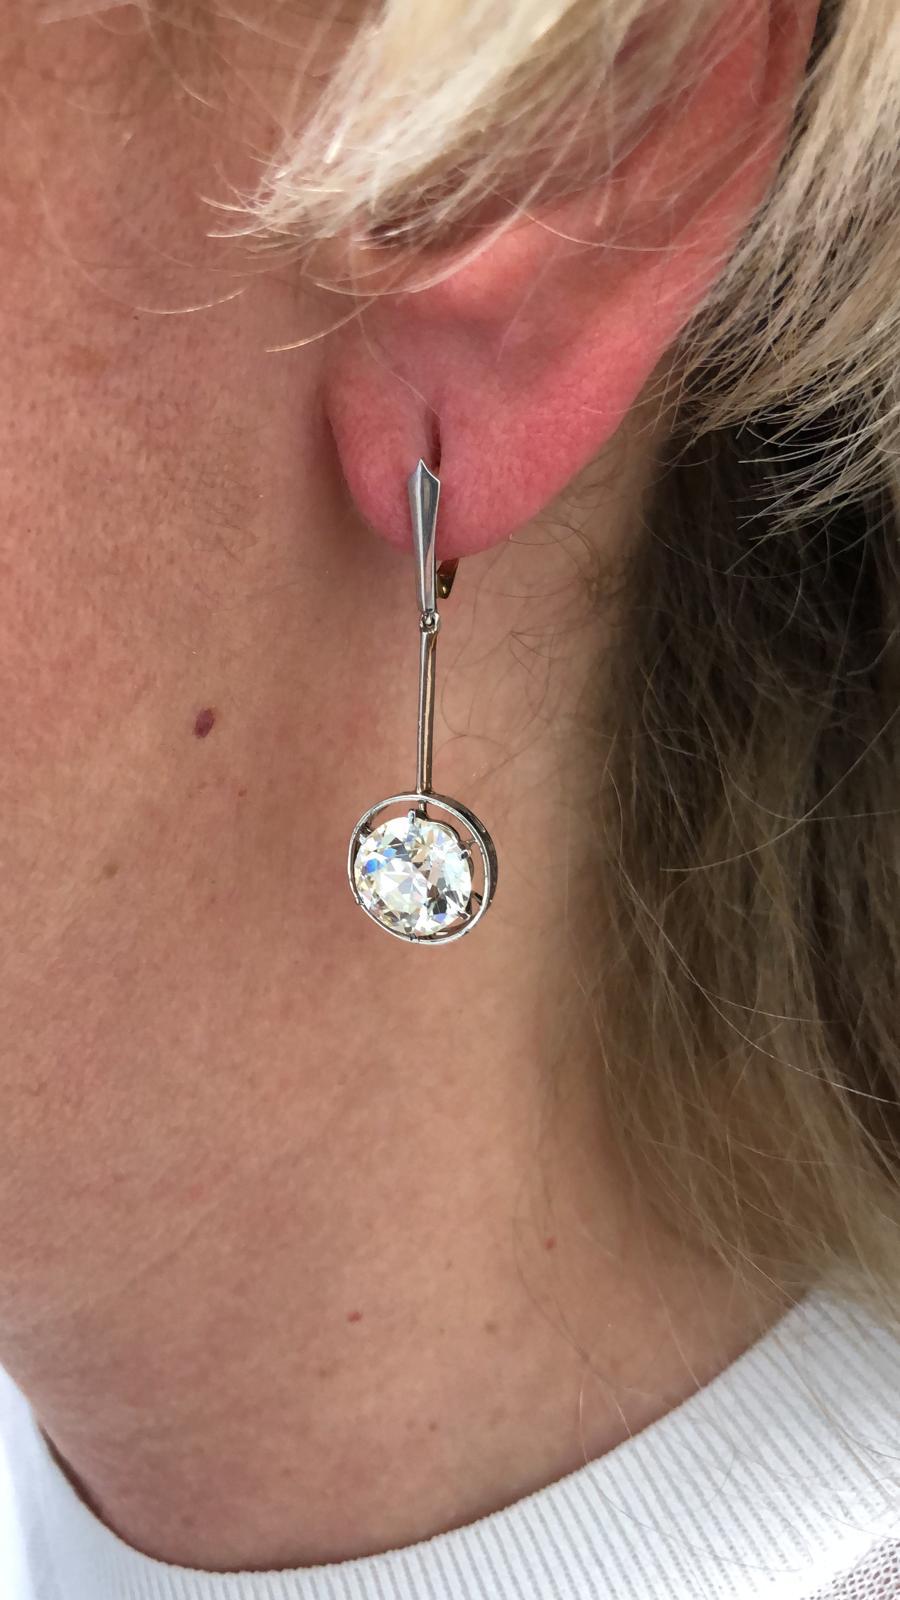 18k European-Cut Diamond Earrings In Good Condition For Sale In New York, NY